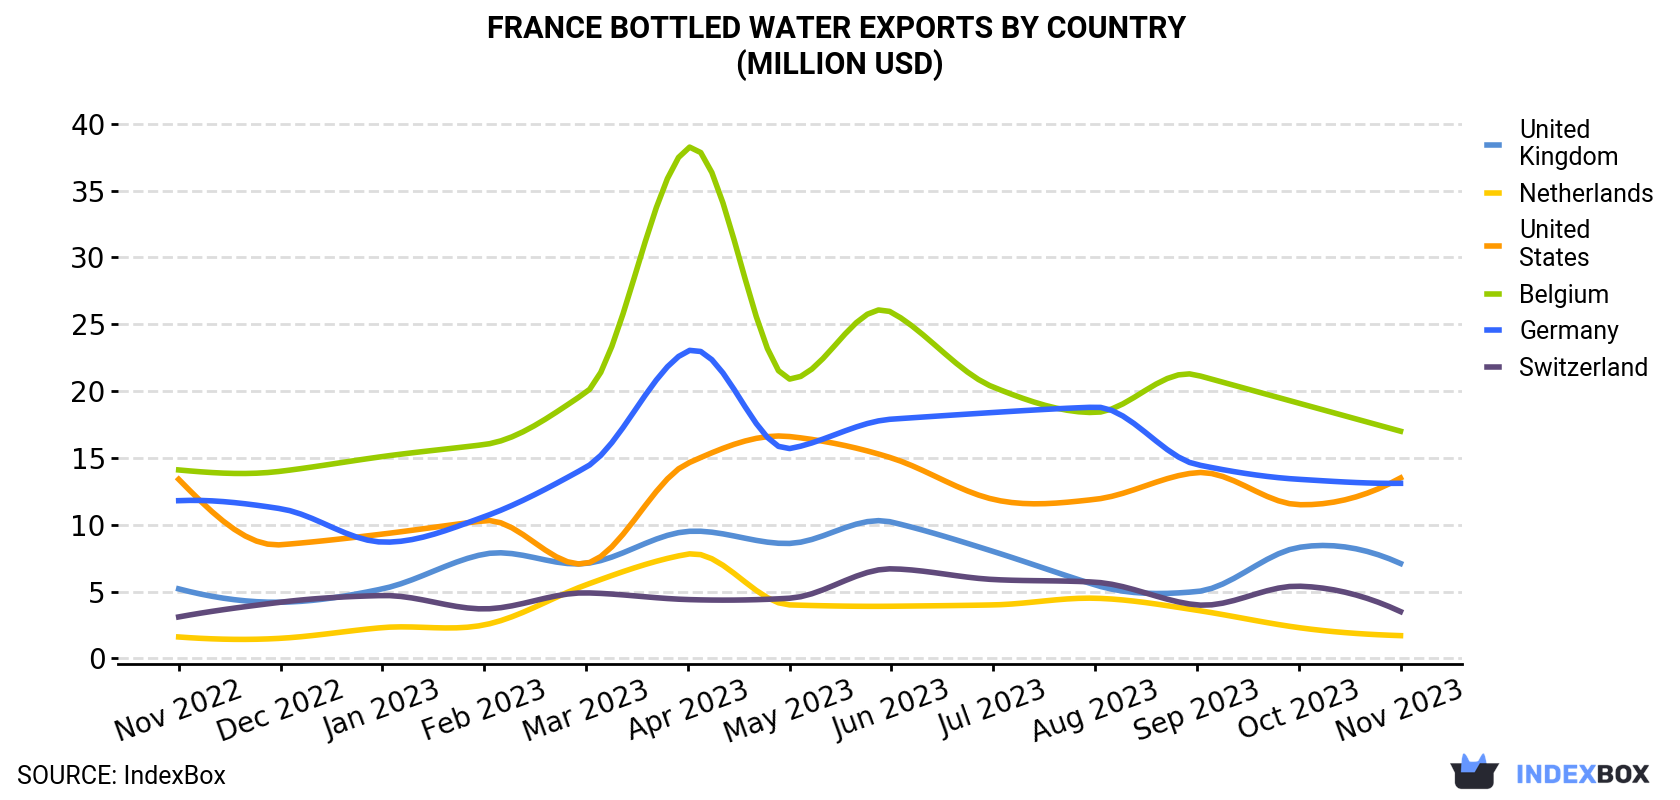 France Bottled Water Exports By Country (Million USD)